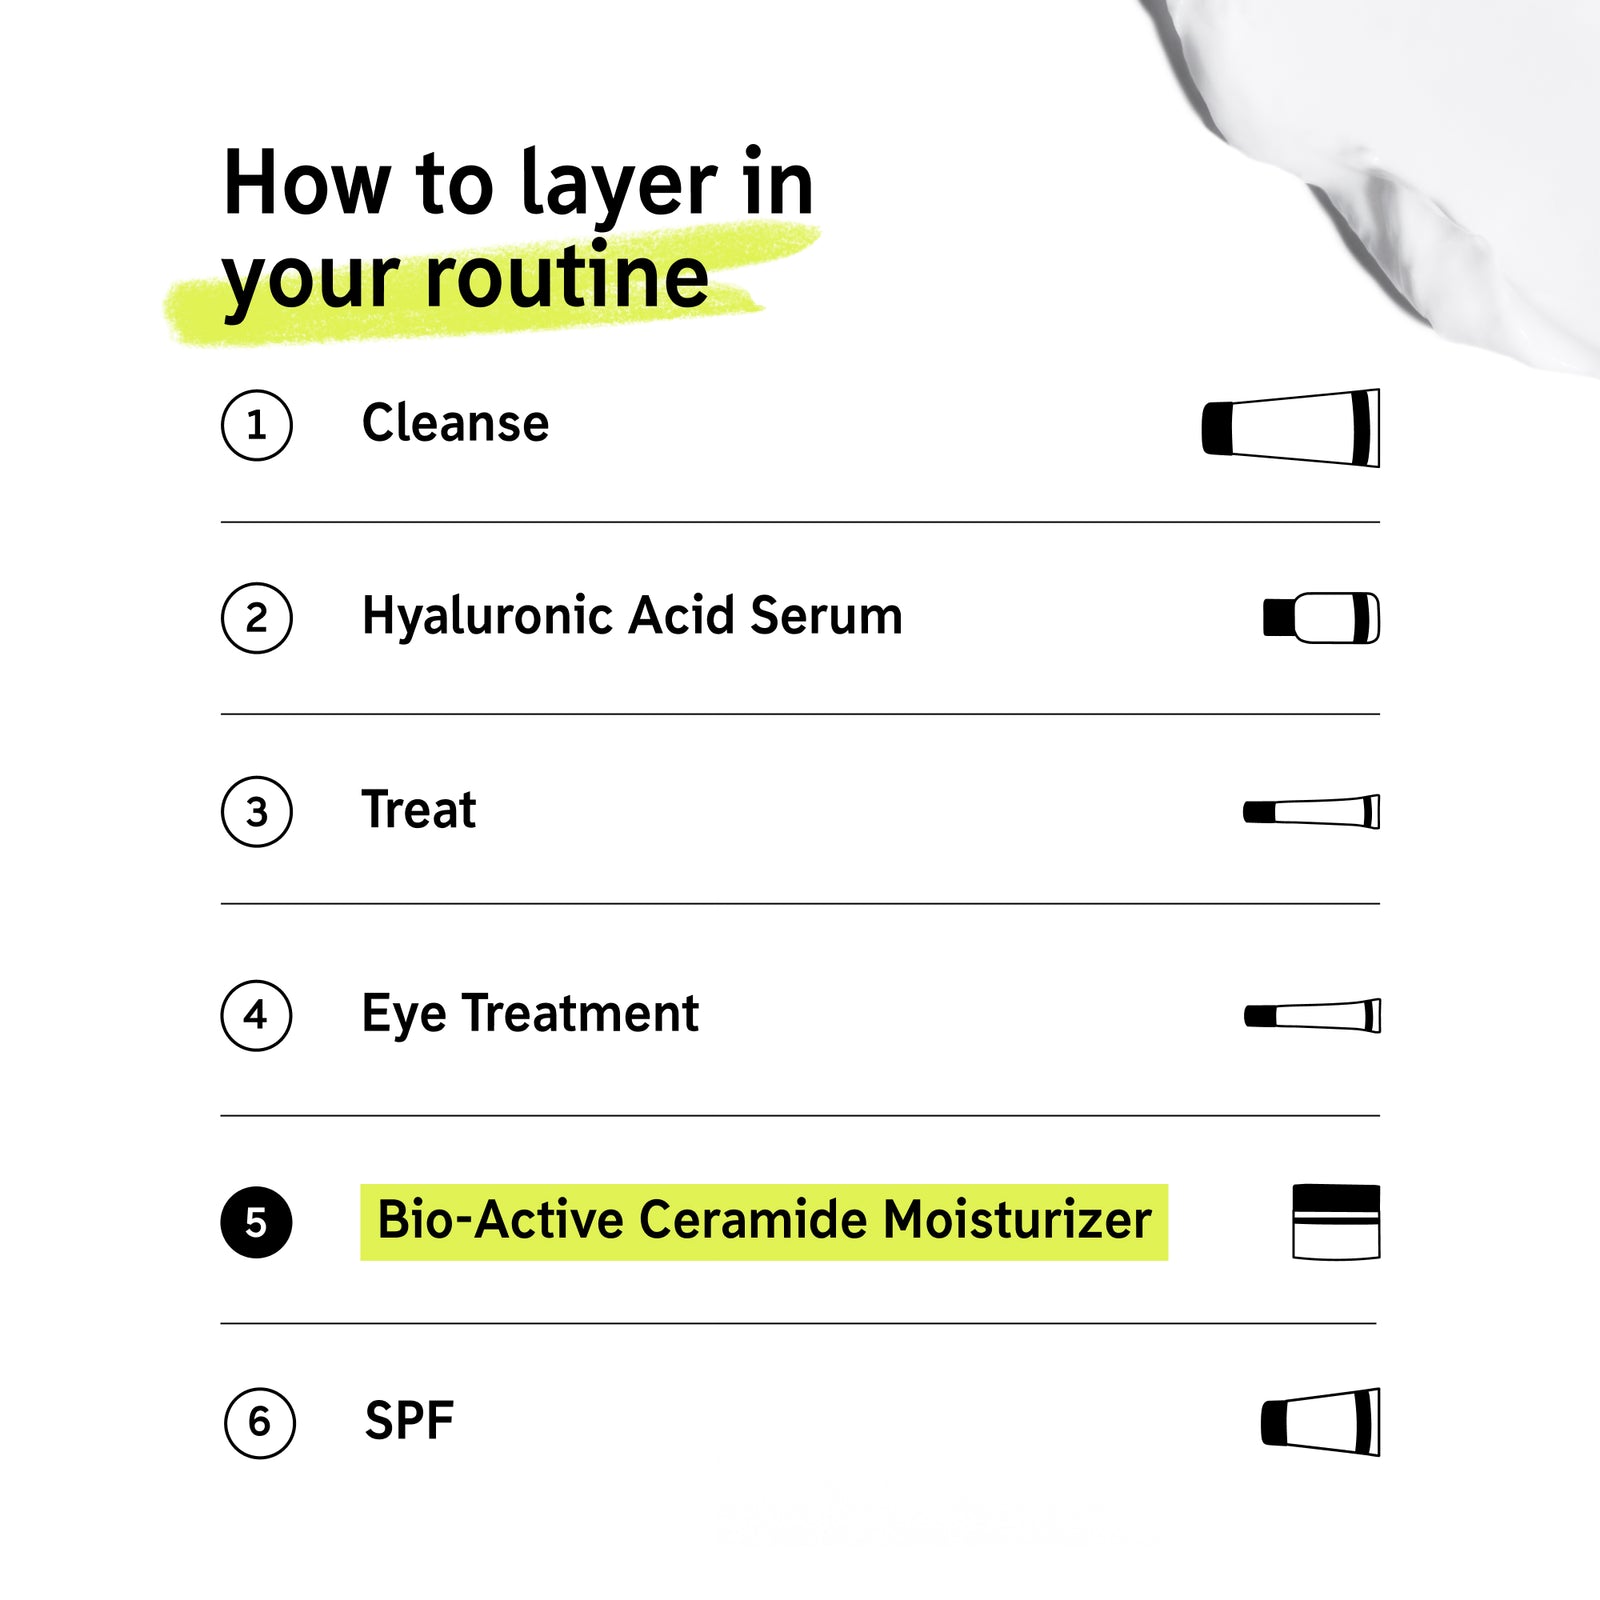 How to layer BioActive Ceramide Moisturizer in your routine